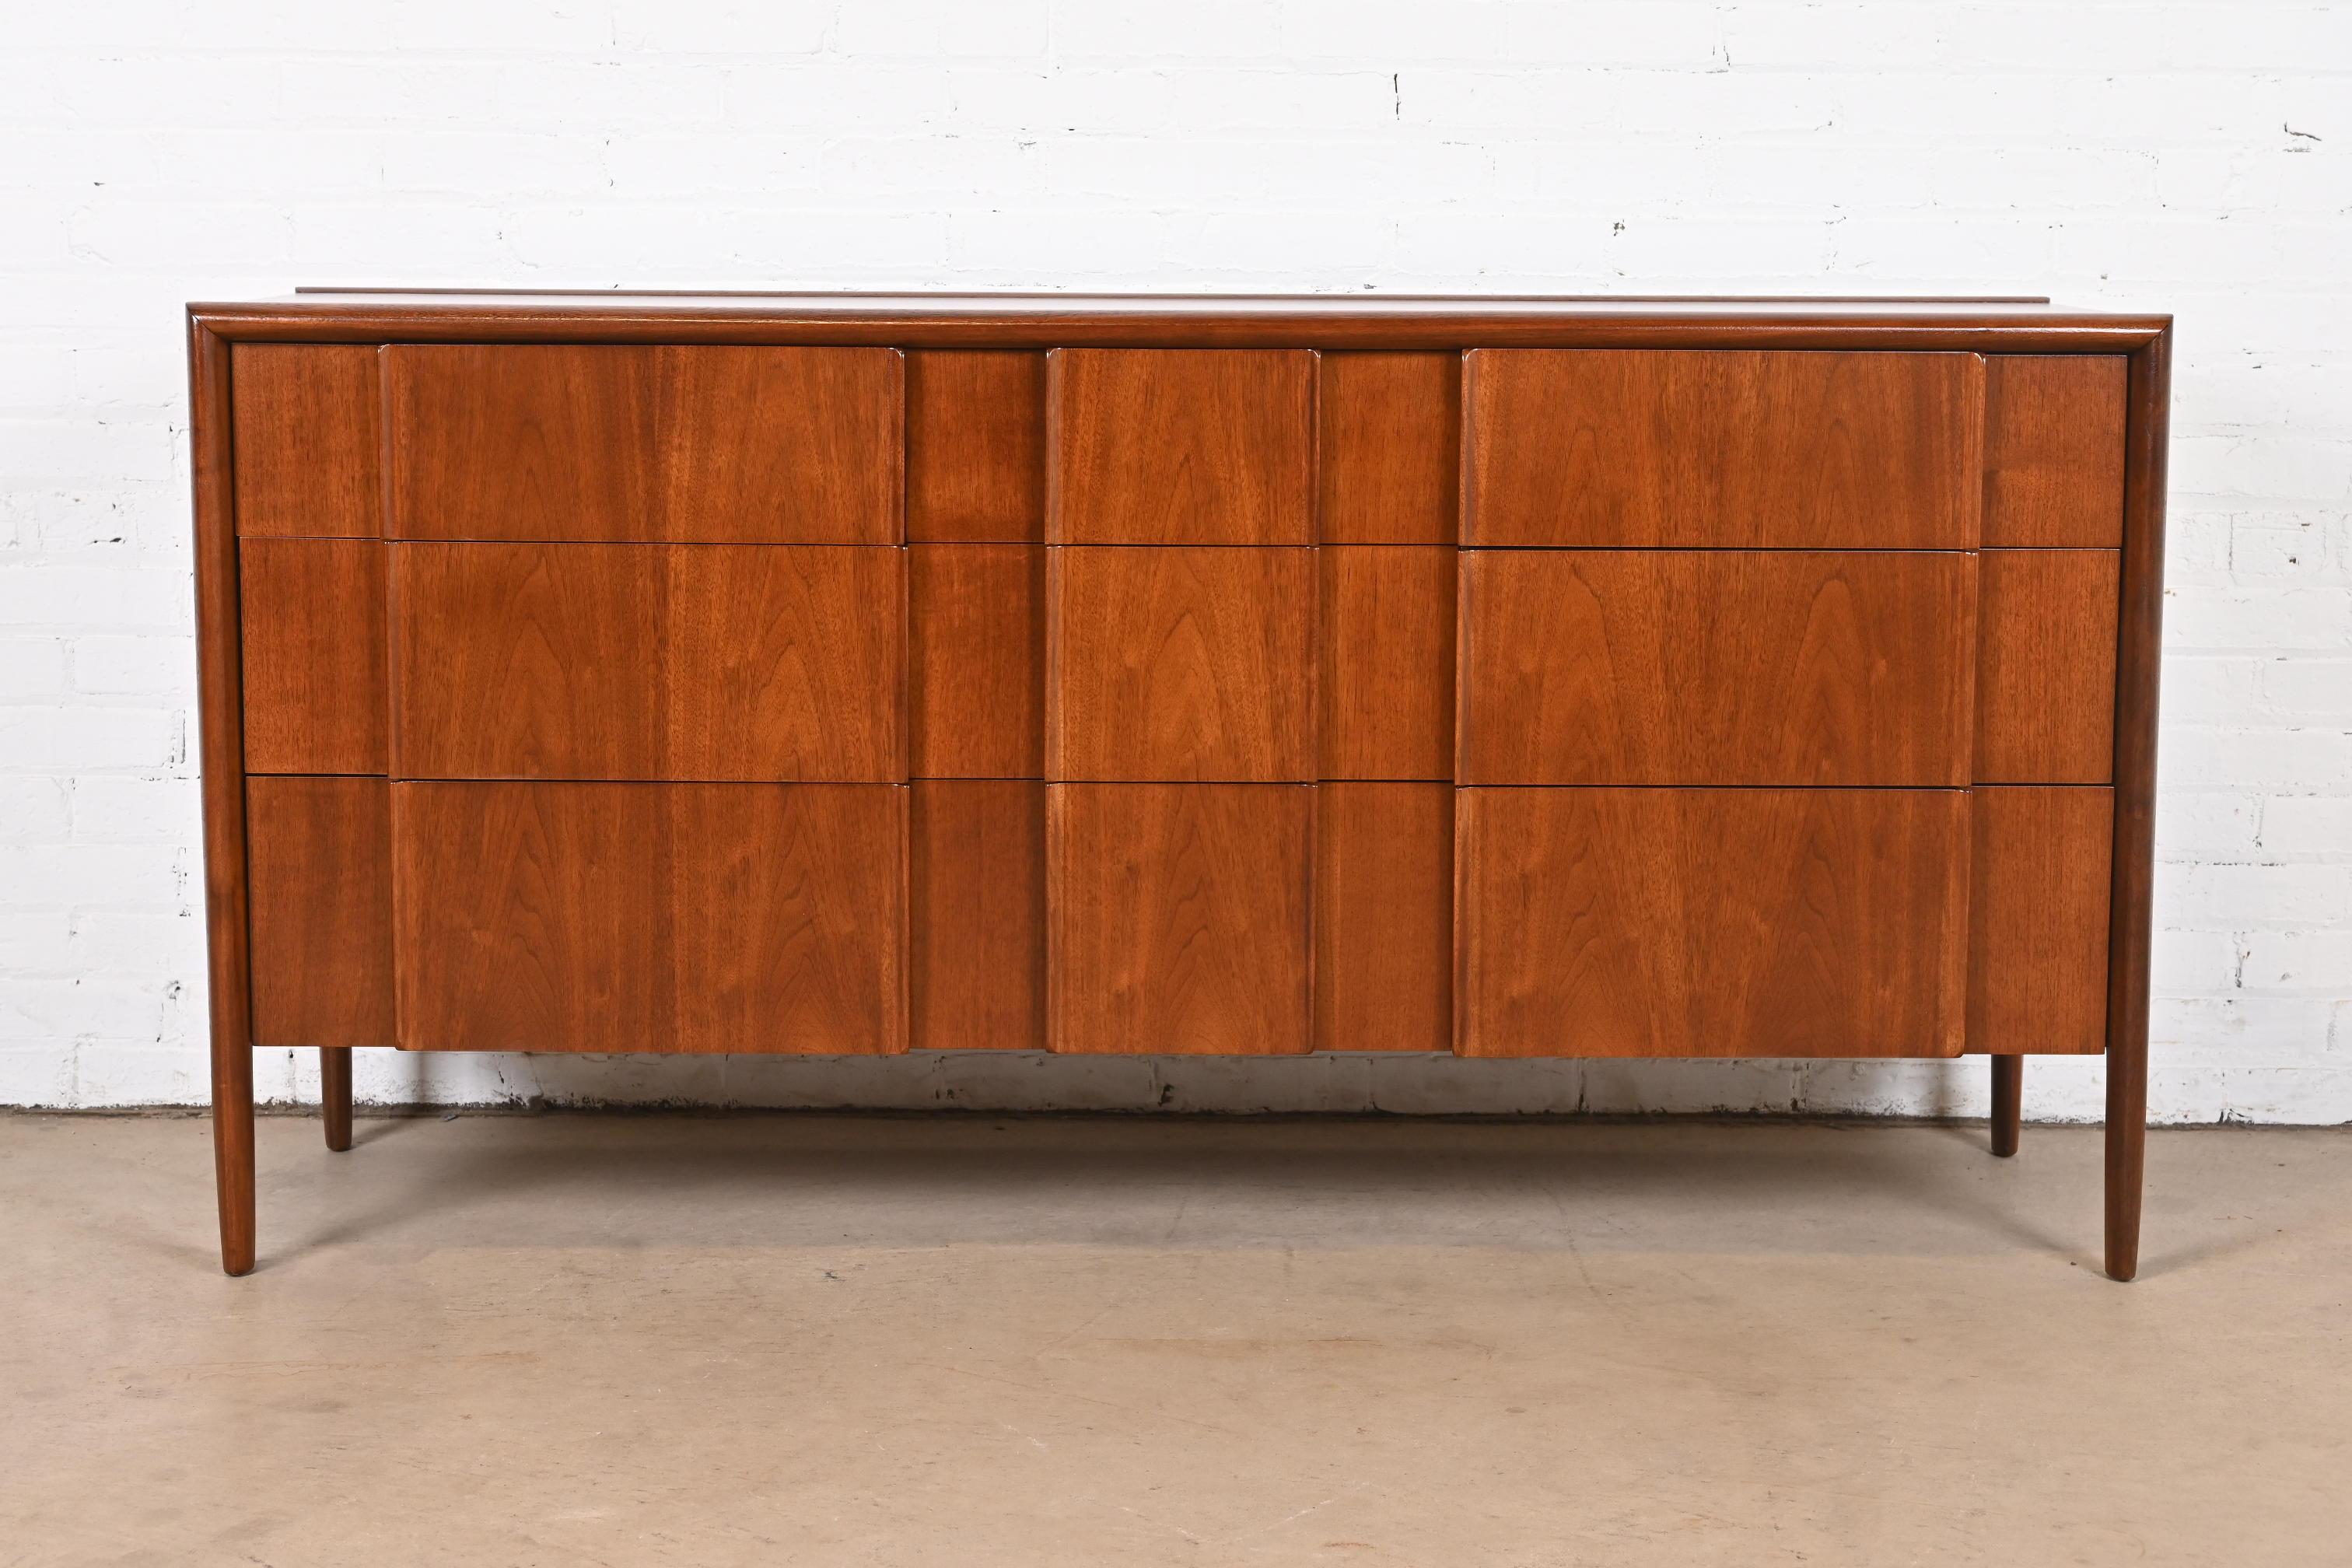 A gorgeous Mid-Century Modern sculpted walnut long dresser or credenza

By Barney Flagg for Drexel, 